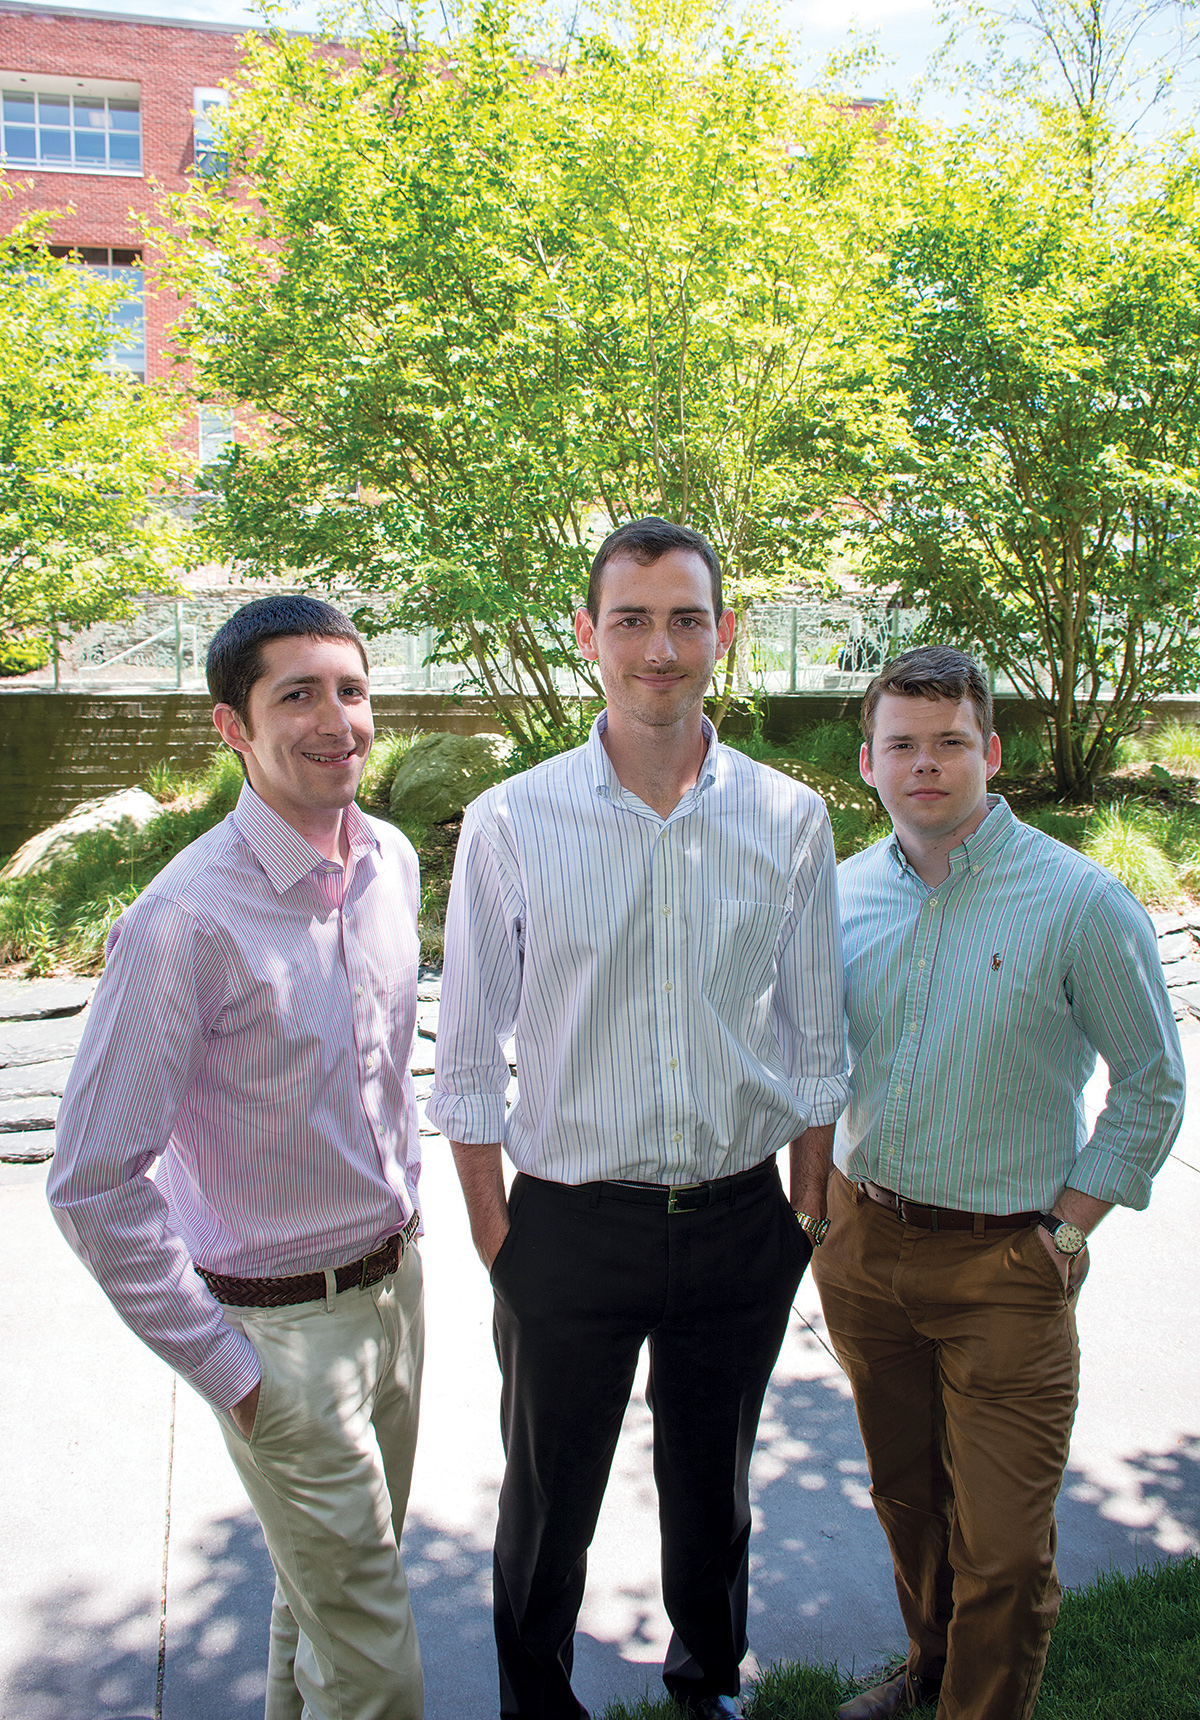 INSPIRED: From left, Nicholas DaSilva, Benjamin Barlock and Kenneth Rose, Ph.D. students at the University of Rhode Island’s College of Pharmacy, discuss the drug-development company they launched, Alcinous Pharmaceuticals. / COURTESY URI/NORA LEWIS